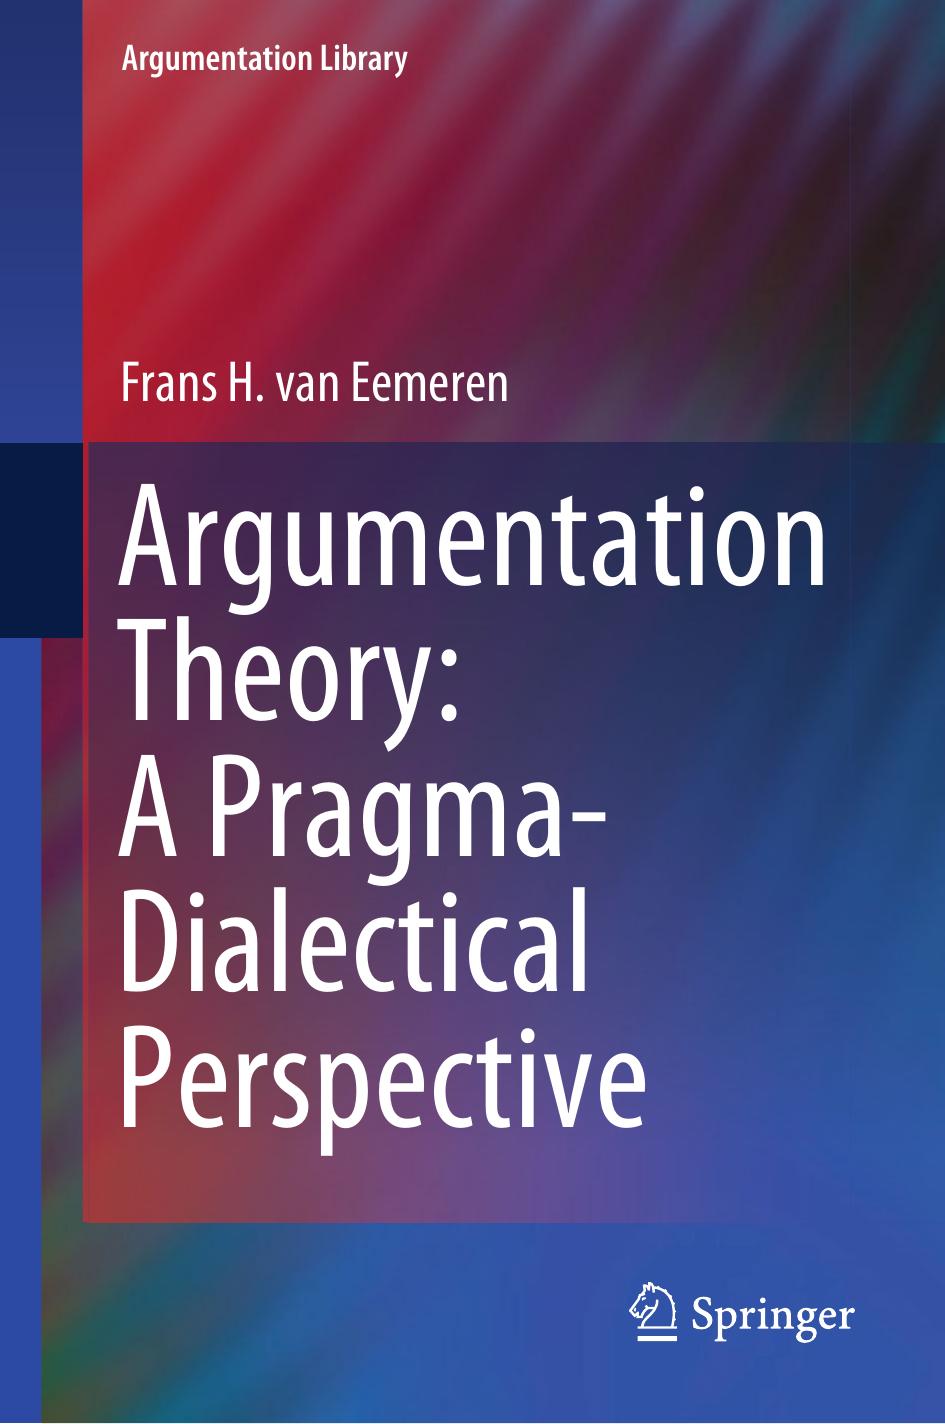 Argumentation Theory: A Pragma-Dialectical Perspective by Frans H. van Eemeren